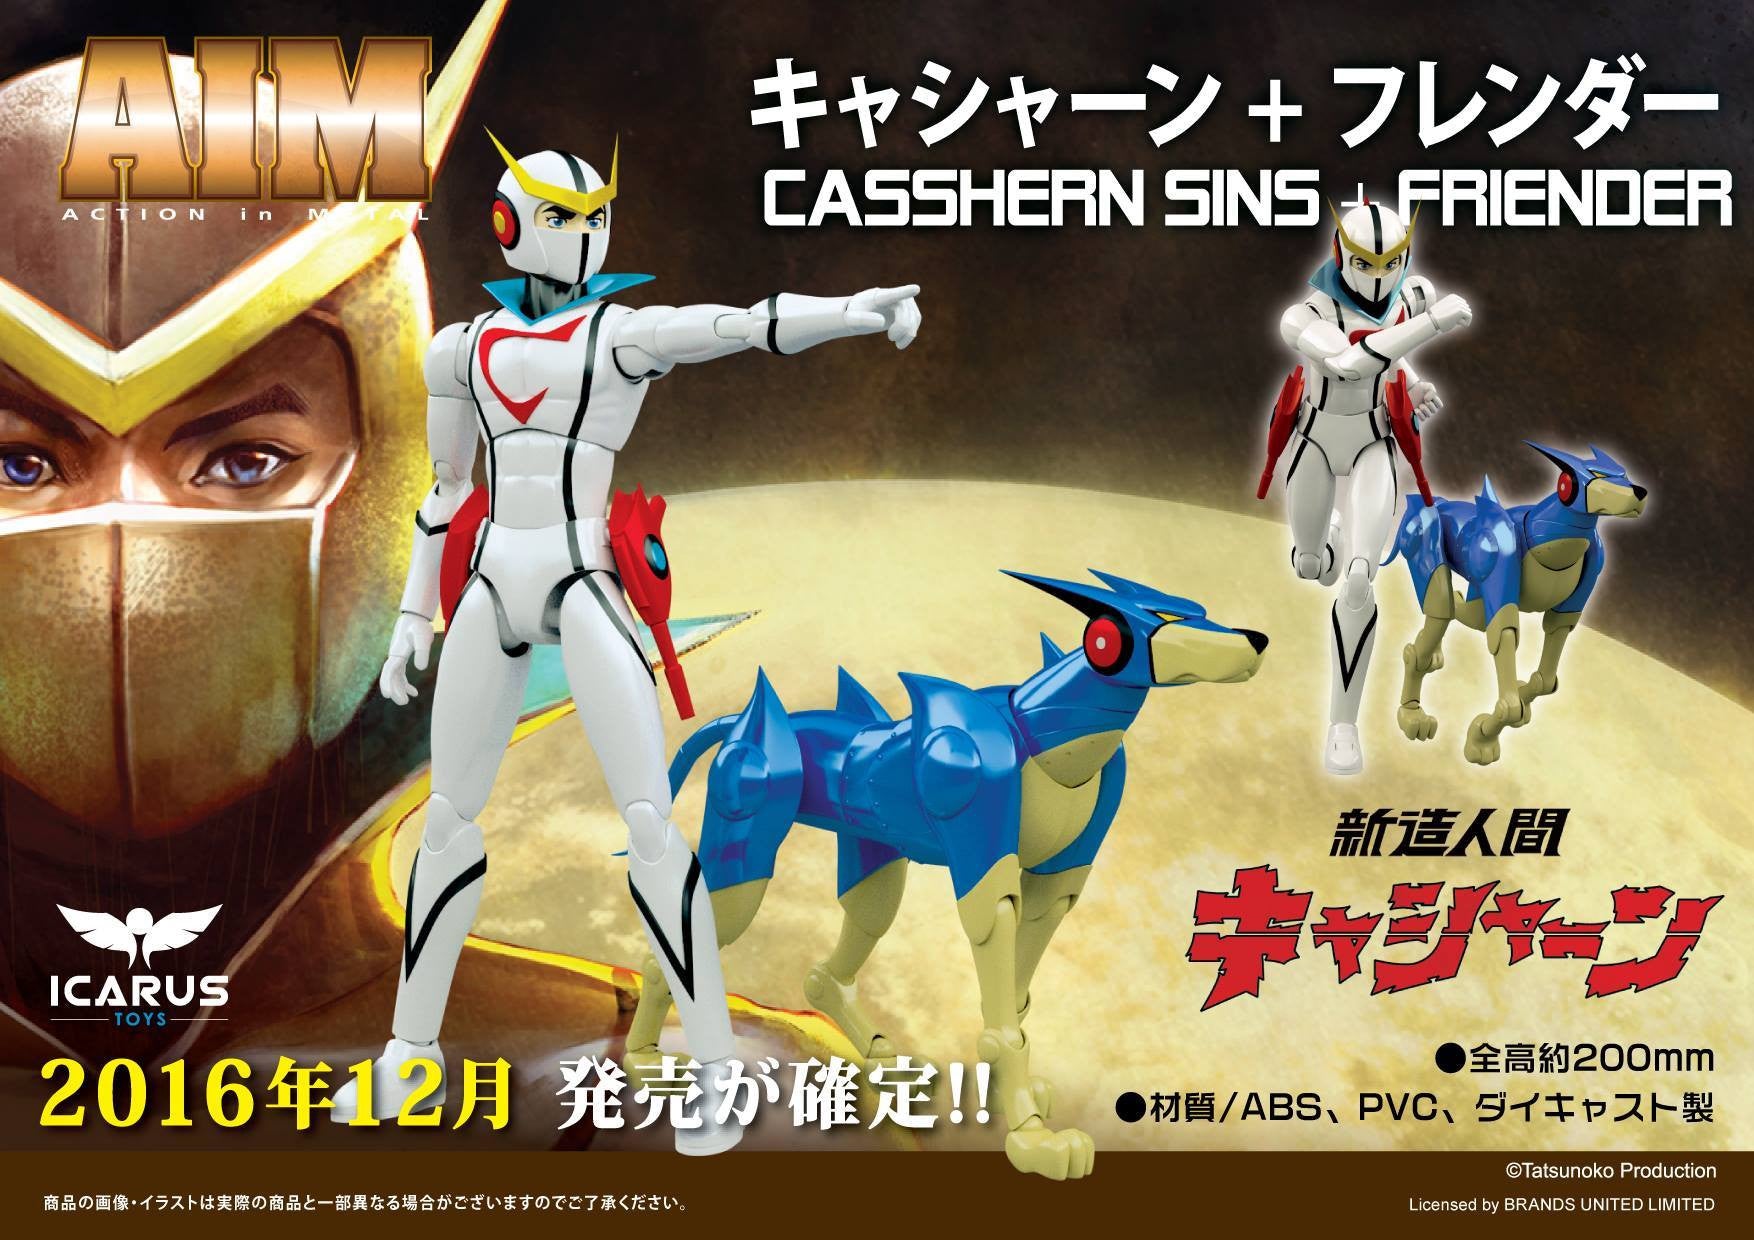 Icarus Toys - Action In Metal - Casshern Sins & Friender - Marvelous Toys